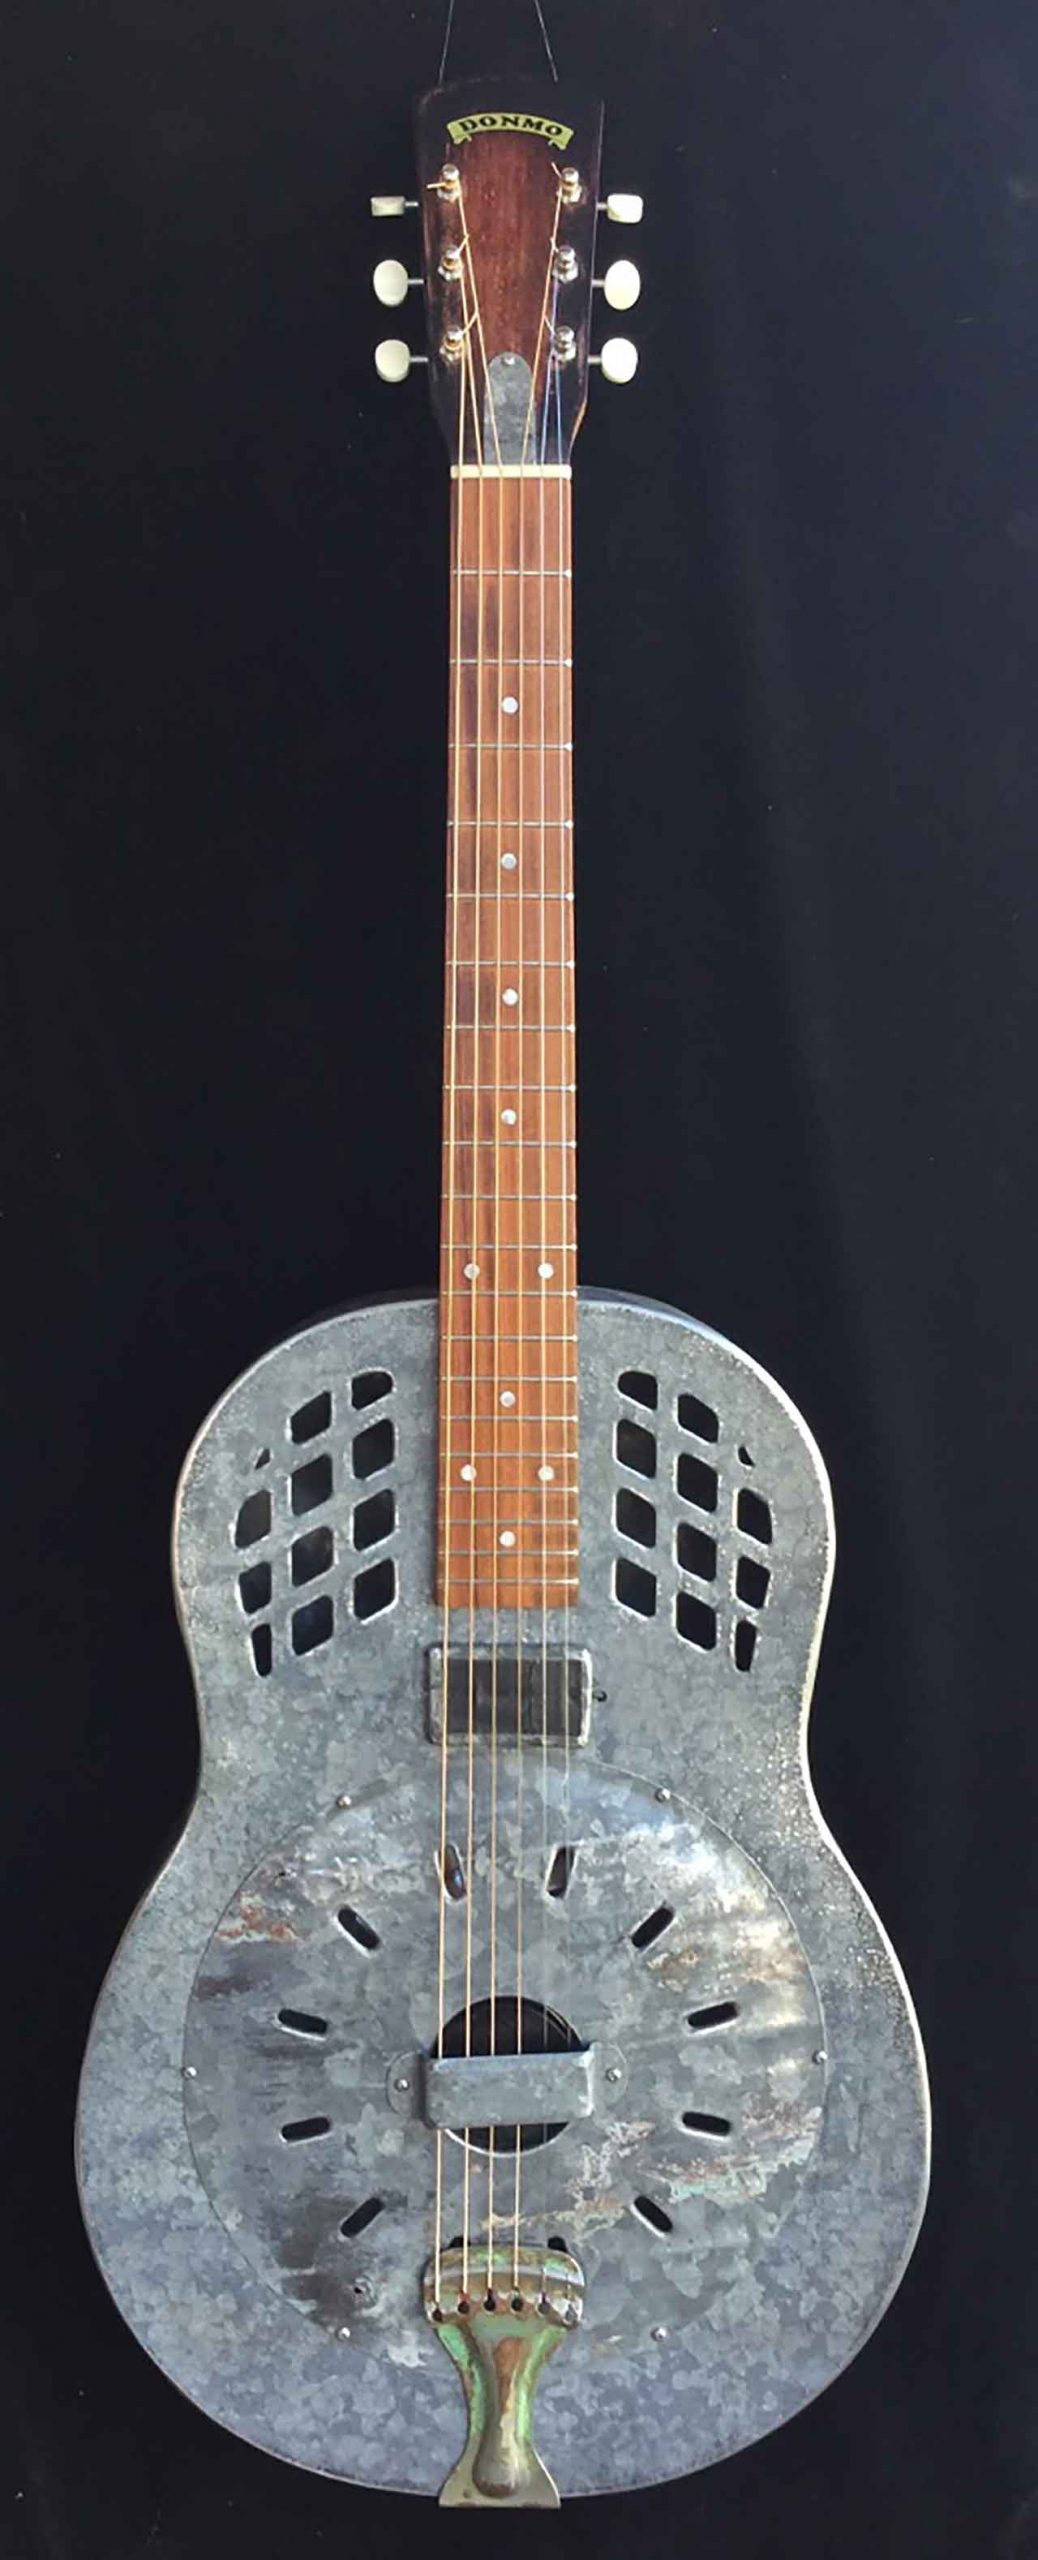 Donmo Resonator Guitars joined Luthiers.com